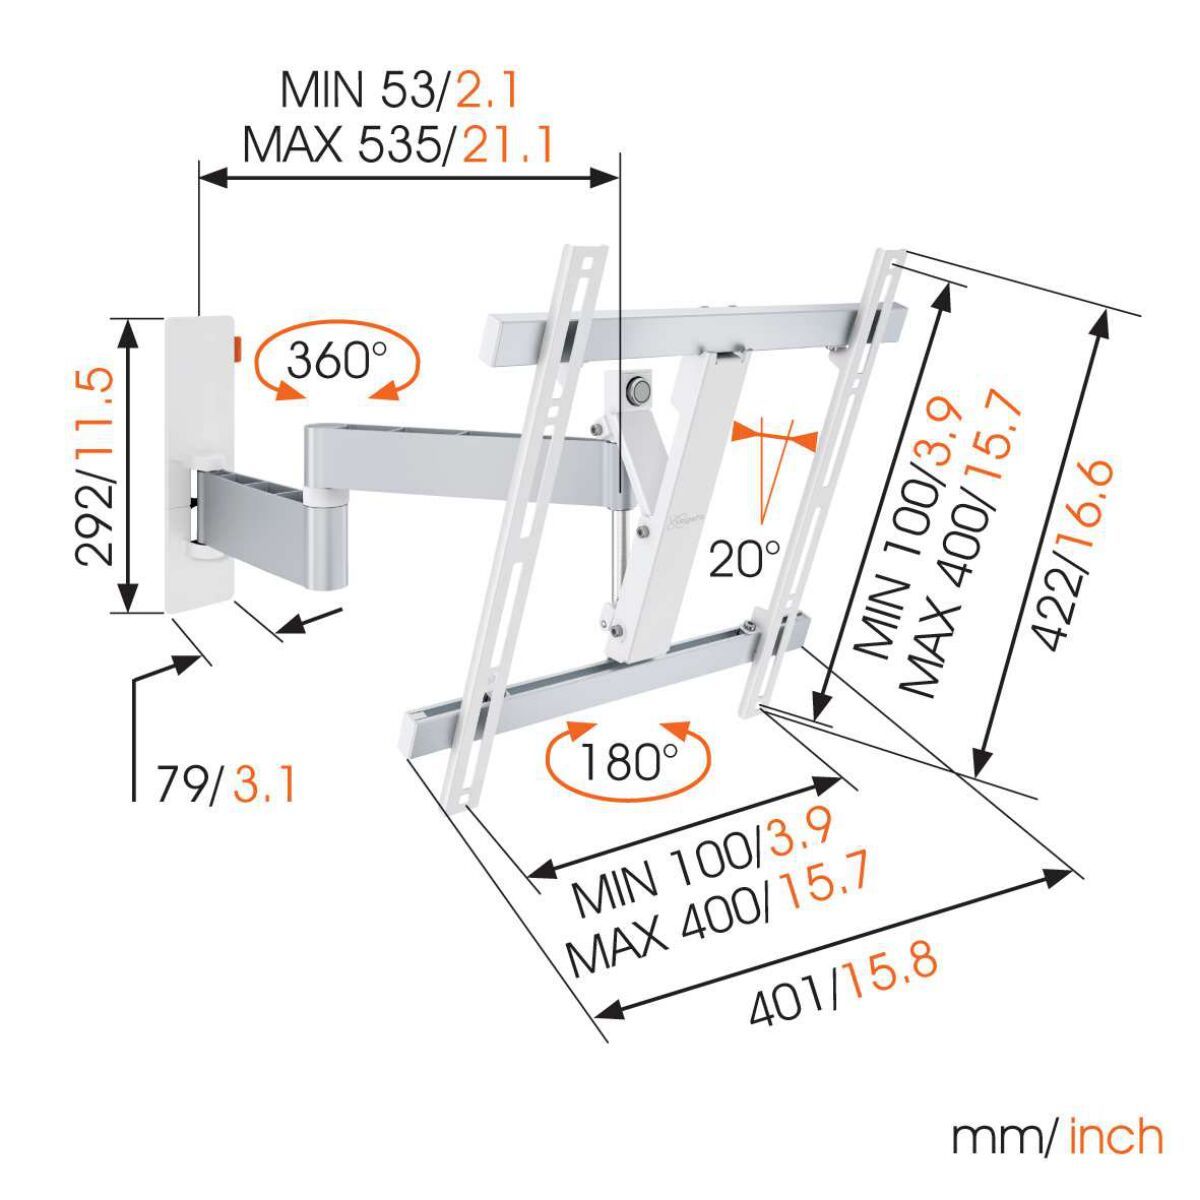 Vogel's W53071 Full-Motion TV Wall Mount (white) - Suitable for 32 up to 55 inch TVs - Full motion (up to 180°) - Tilt up to 20° - Dimensions